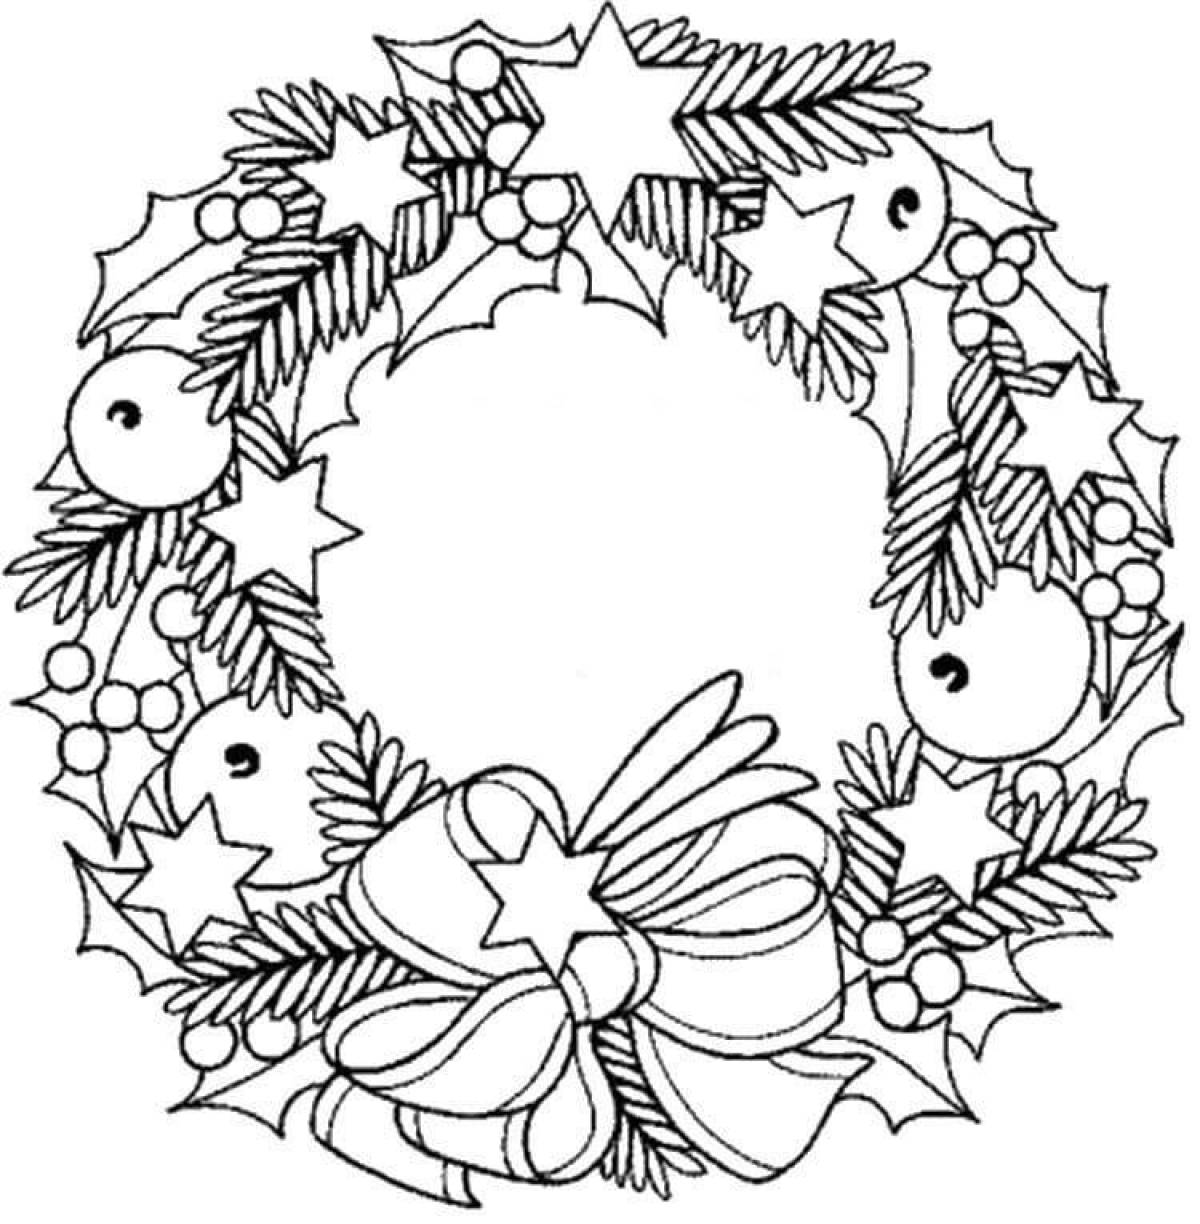 Shining Christmas wreath coloring page